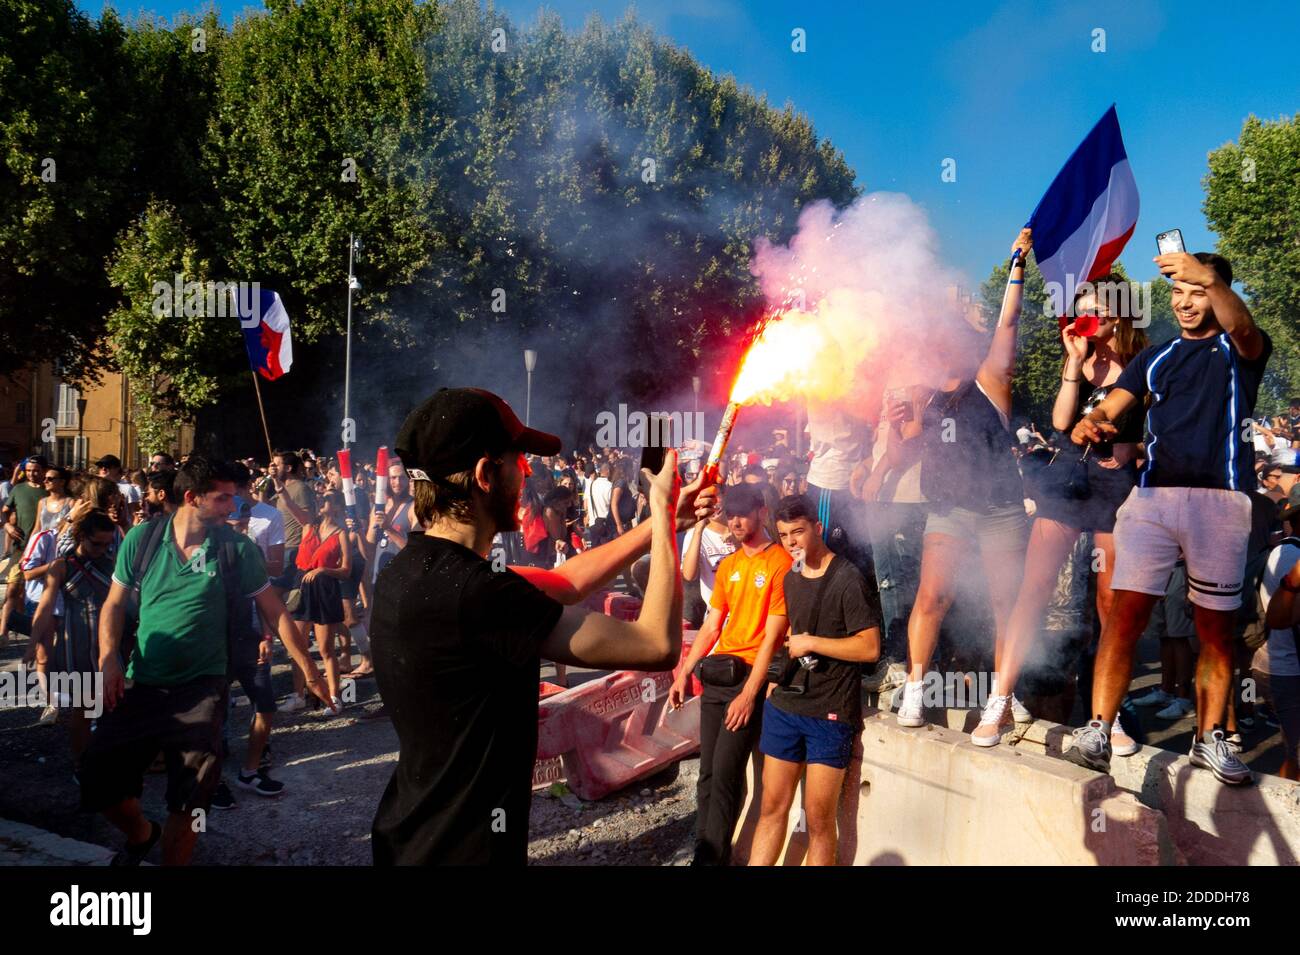 Atmosphere in the streets, right after the end of the 'Russia 2018' FIFA World Cup Finale, in the streets of Aix en Provence, south of France on July 15, 2018. Photo by Ammar Abd Rabbo/ABACAPRESS.COM Stock Photo